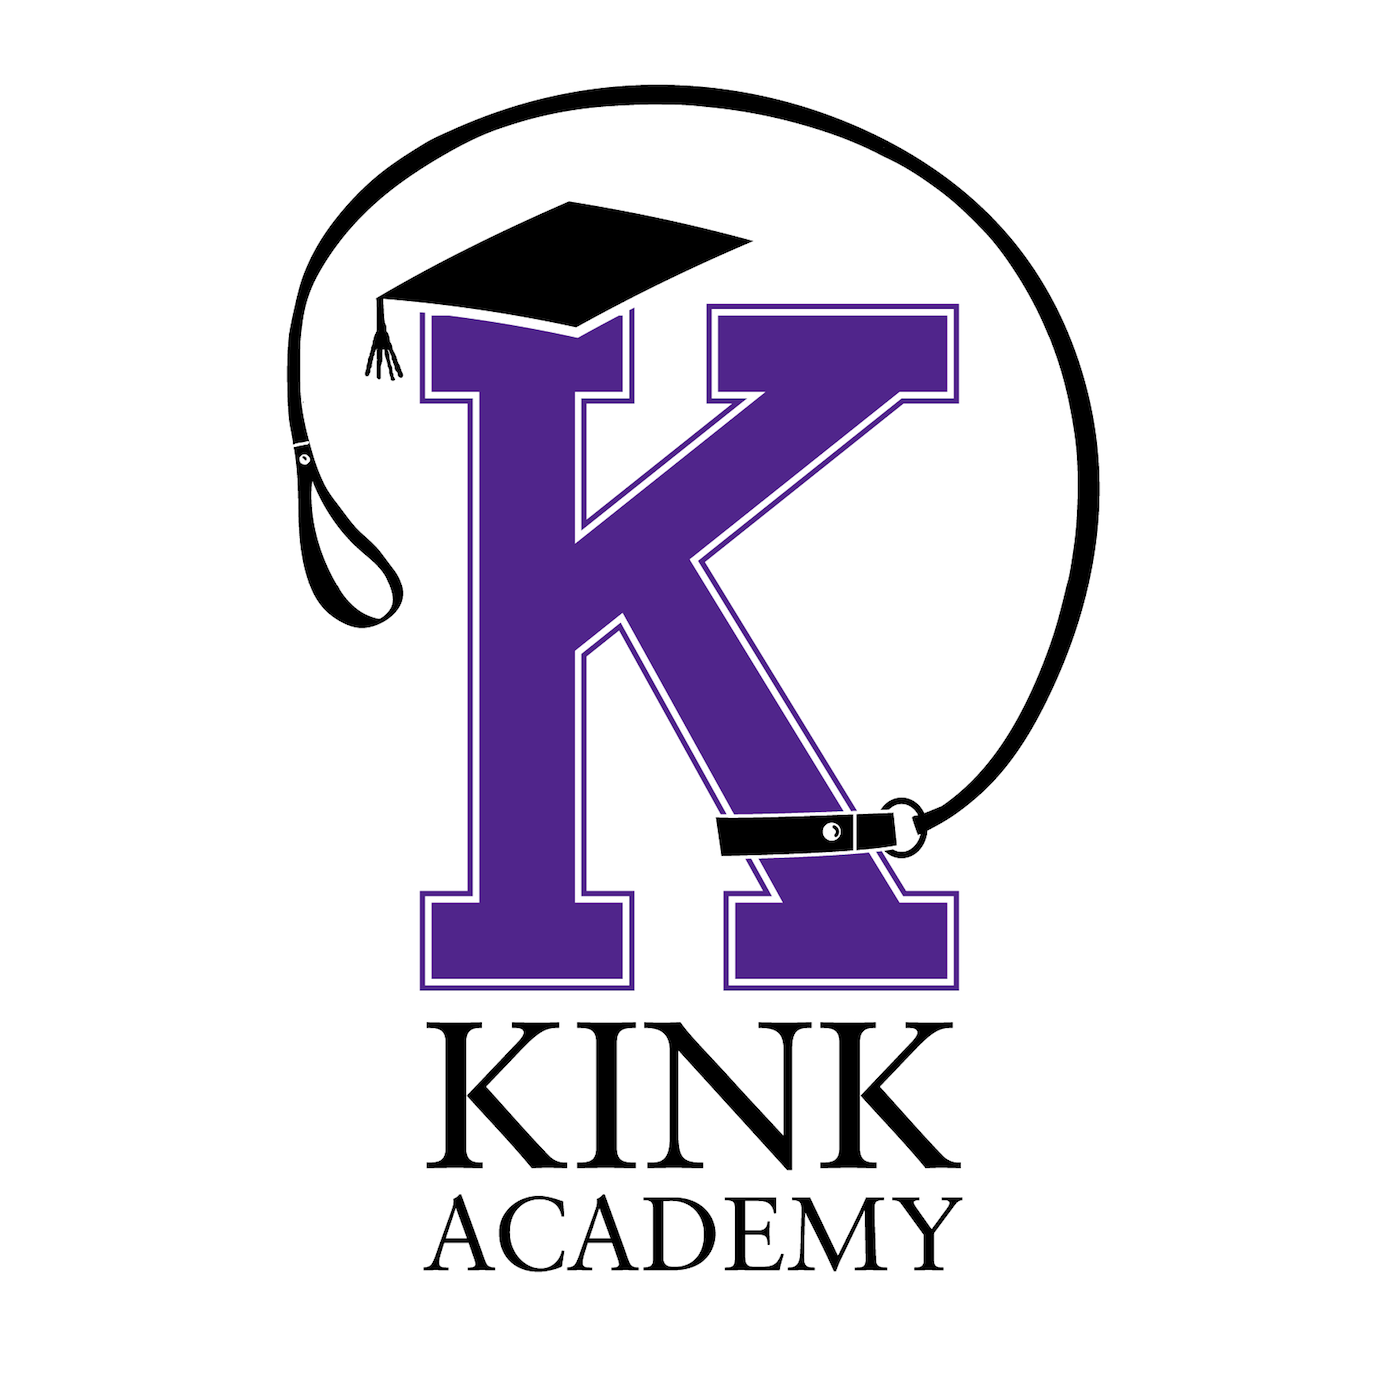 4 Experts on Aftercare - The Kink Academy Podcast iHeart.